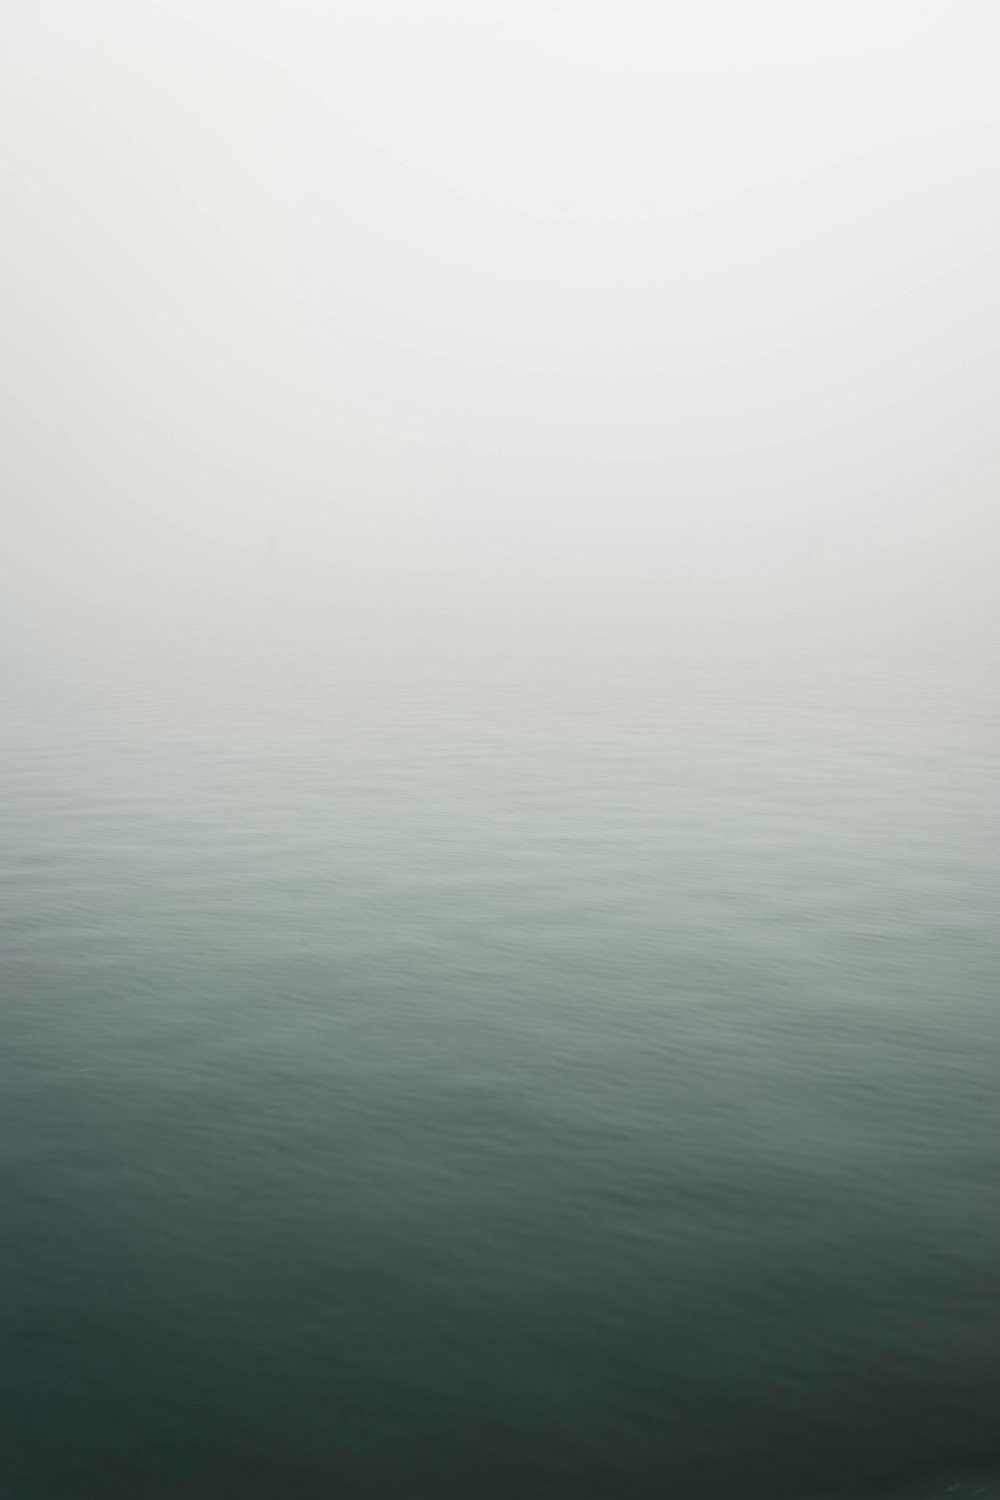 a large body of water surrounded by fog